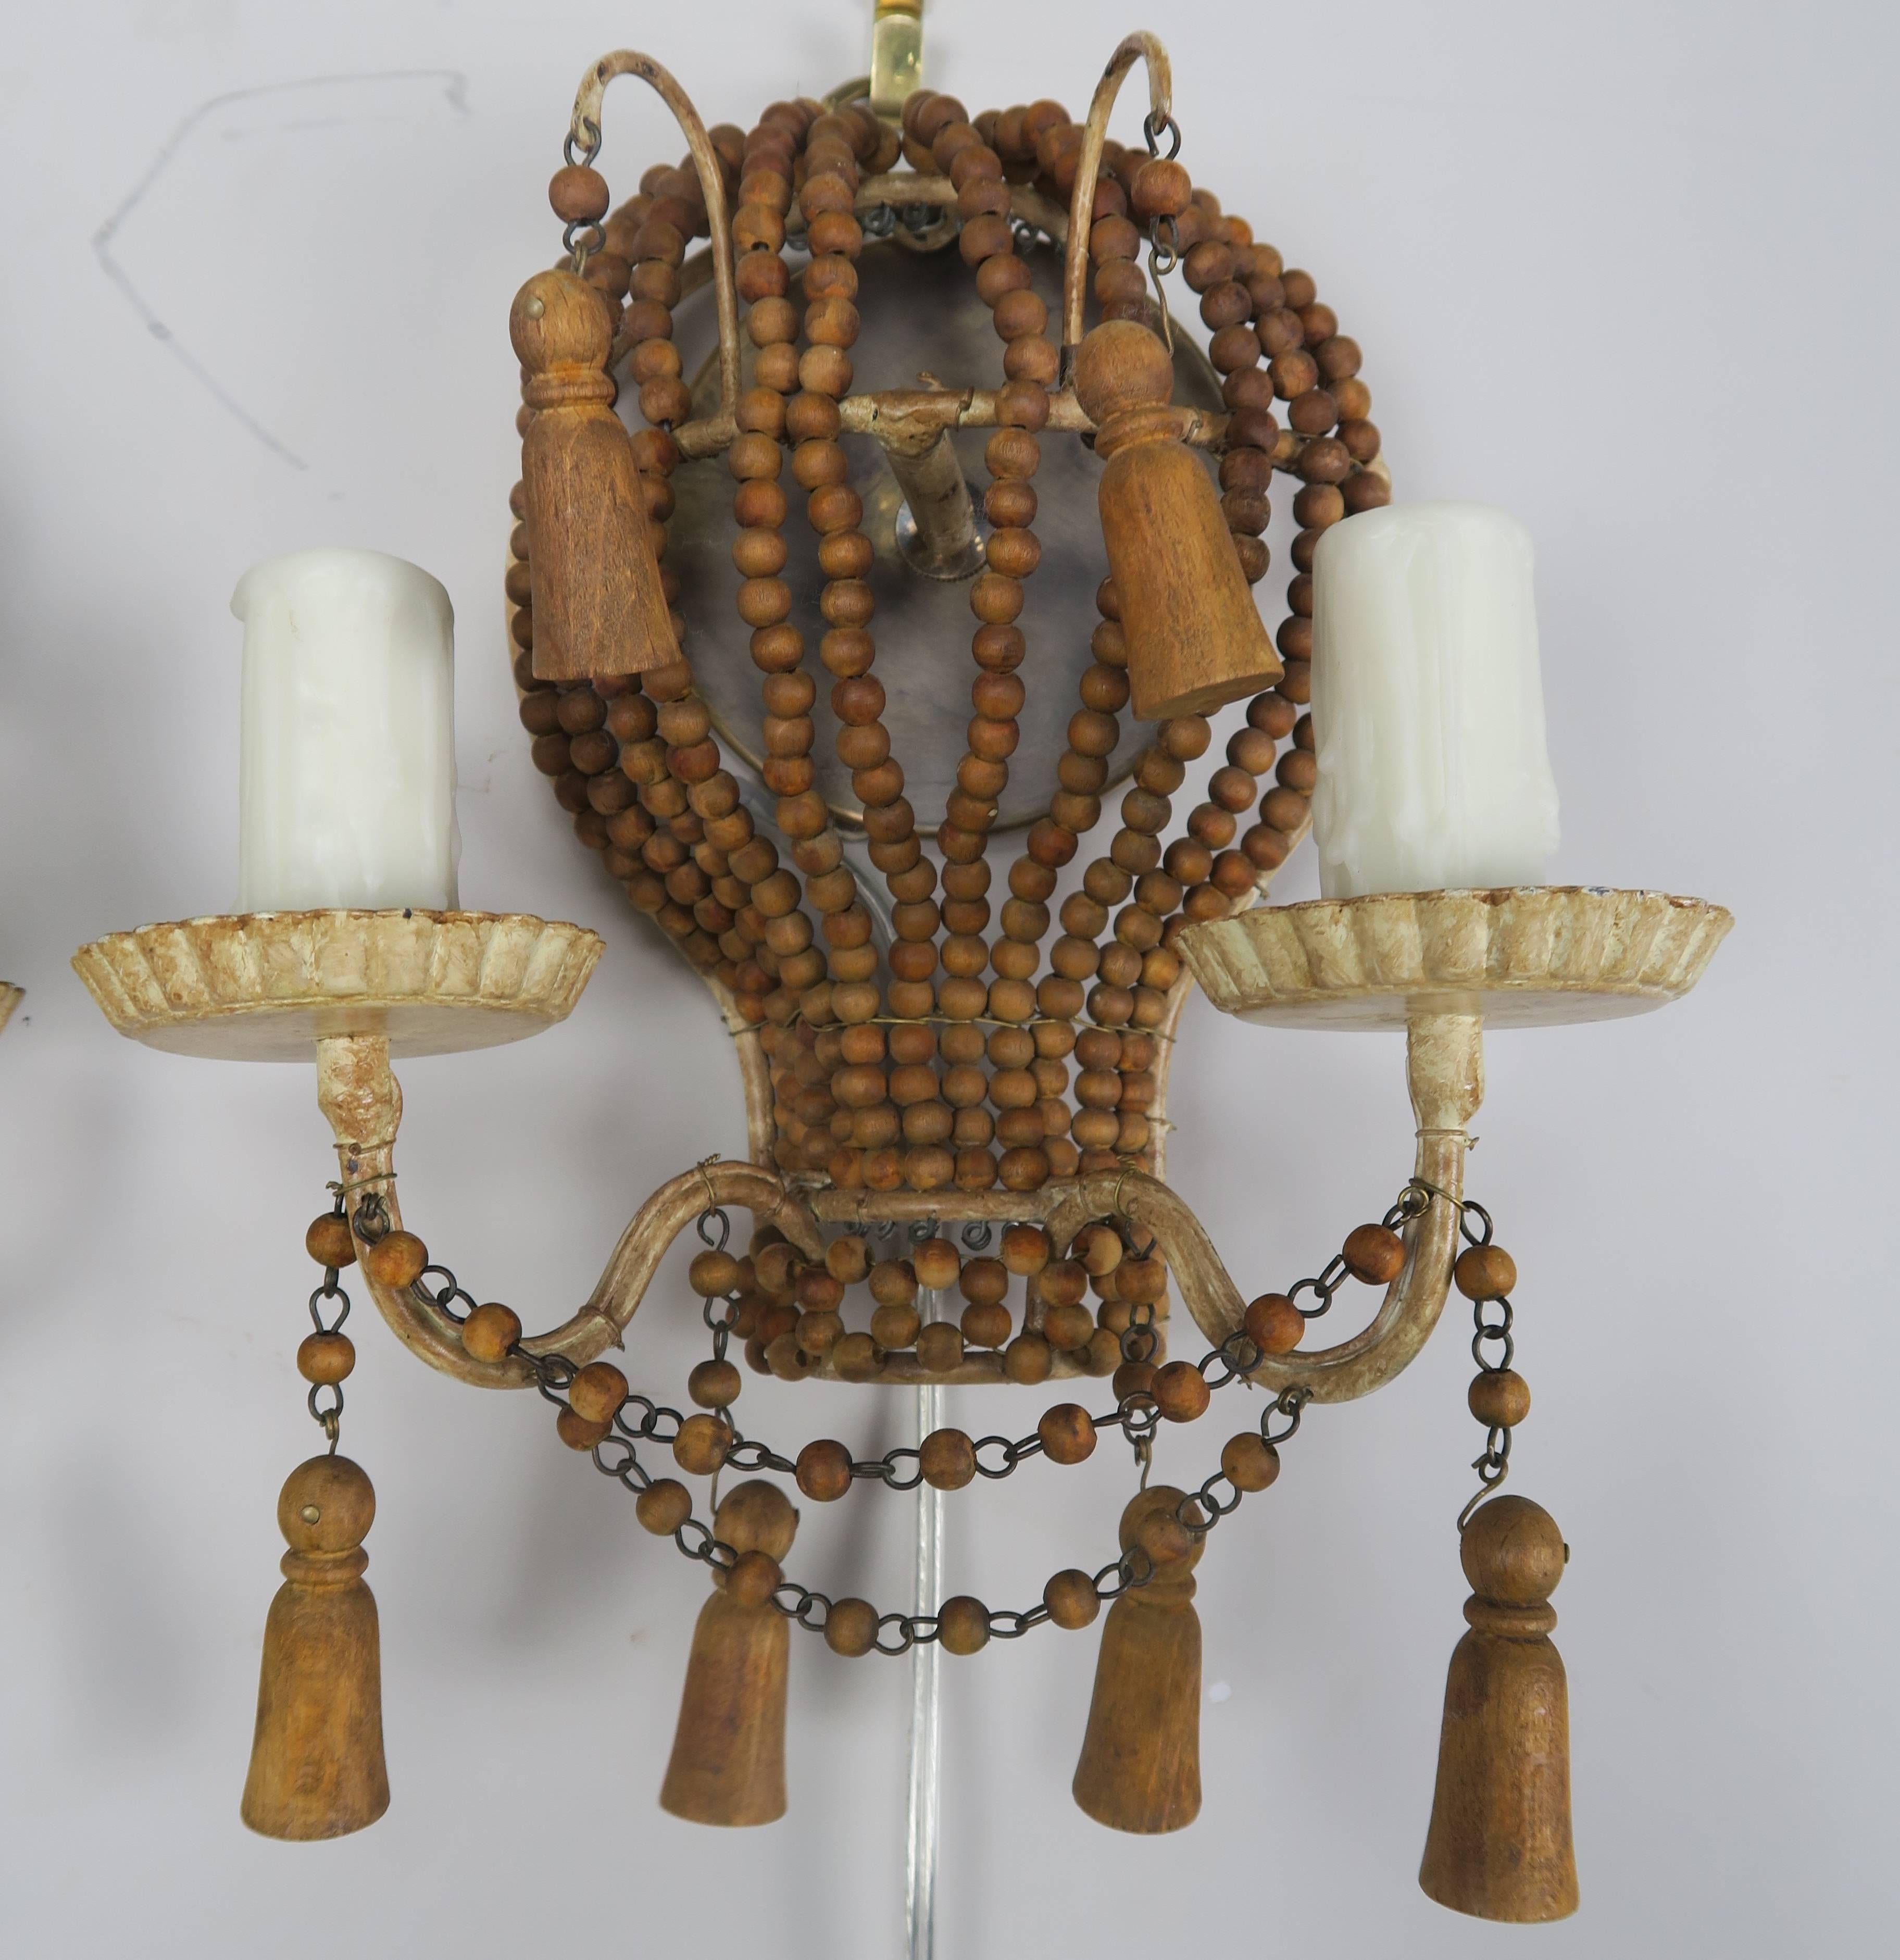 Pair of petite two-light wood beaded balloon sconces with wood tassels, circa 1920s. The sconces have been newly rewired with drip wax candle covers.